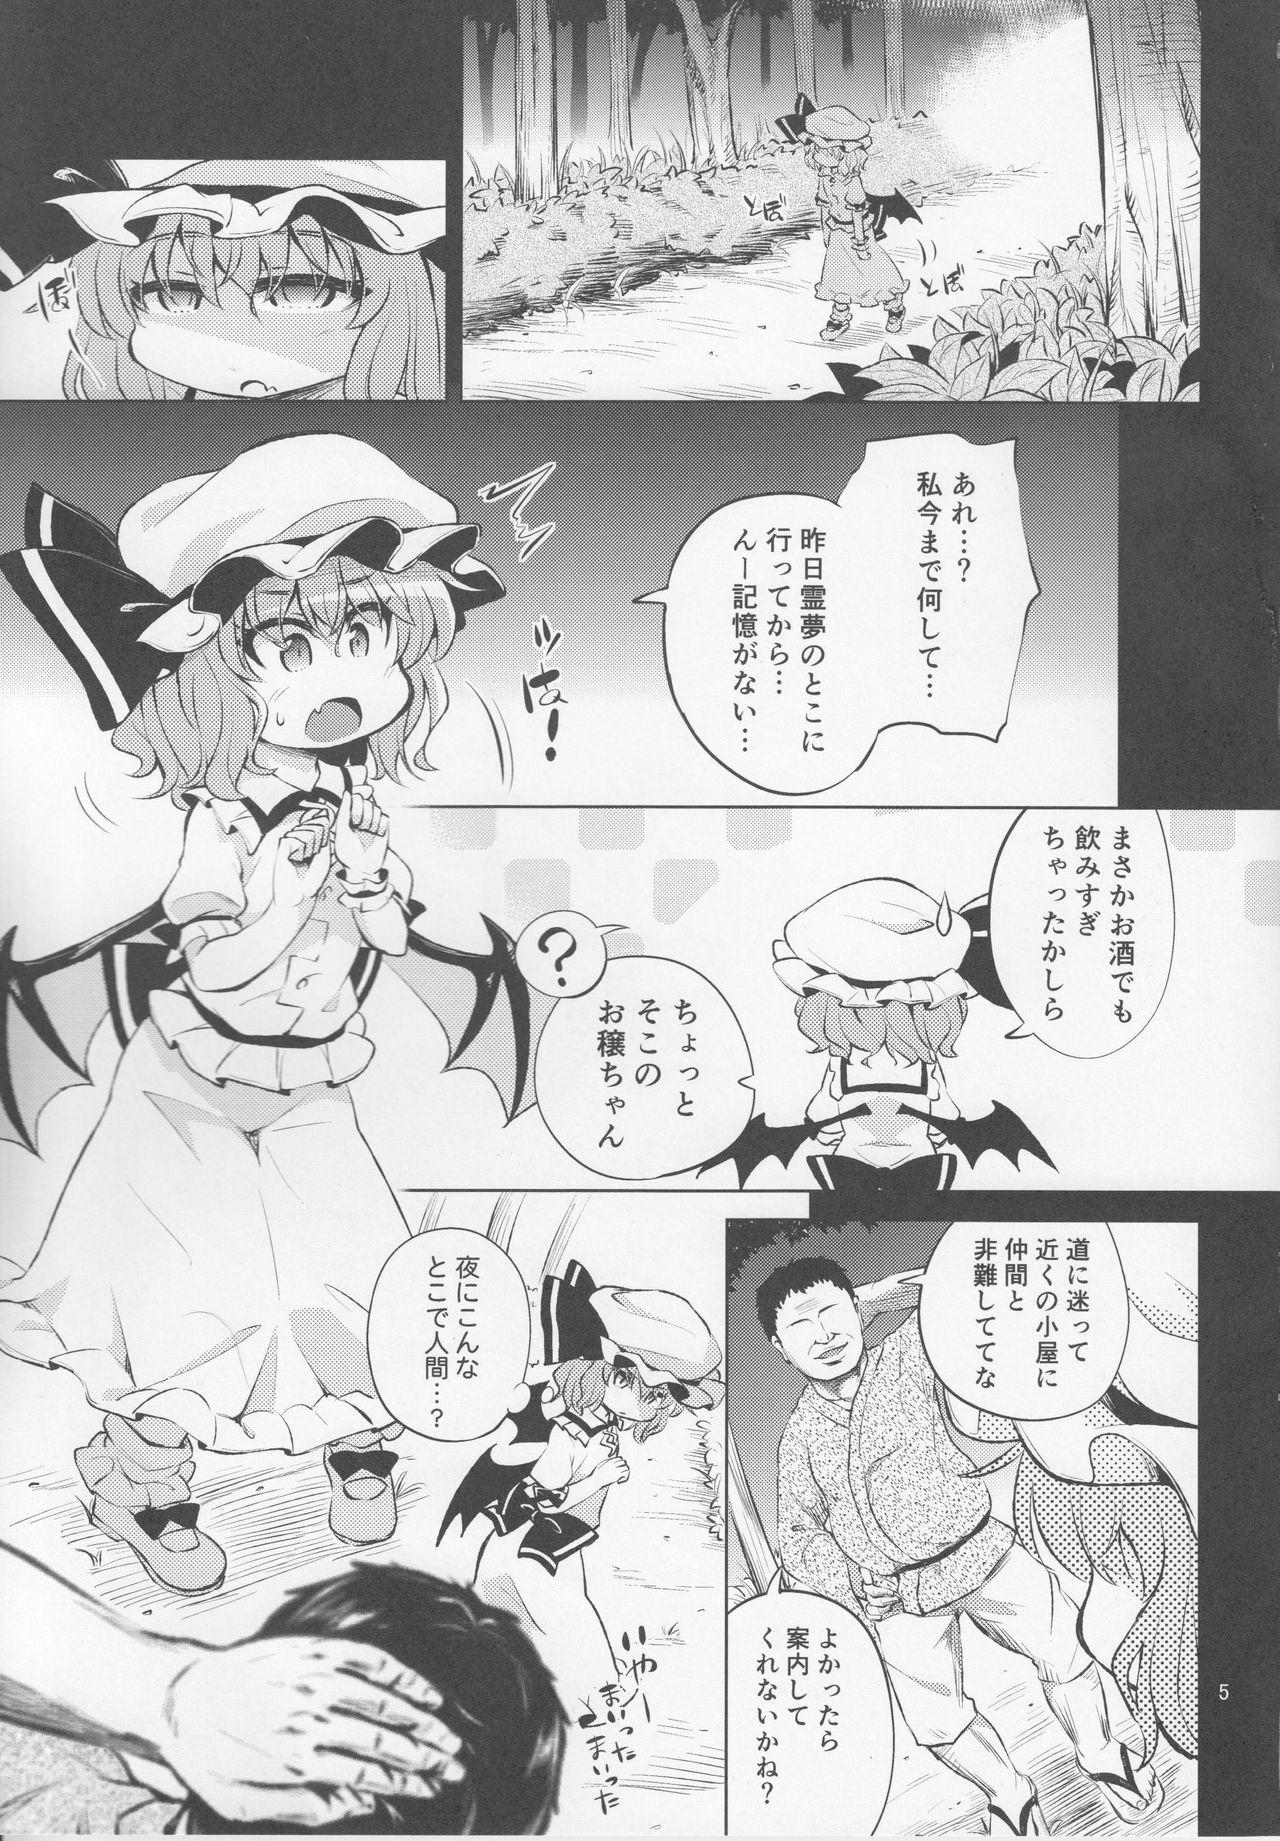 Argentina Scarlet Hearts 2 - Touhou project Hooker - Page 4